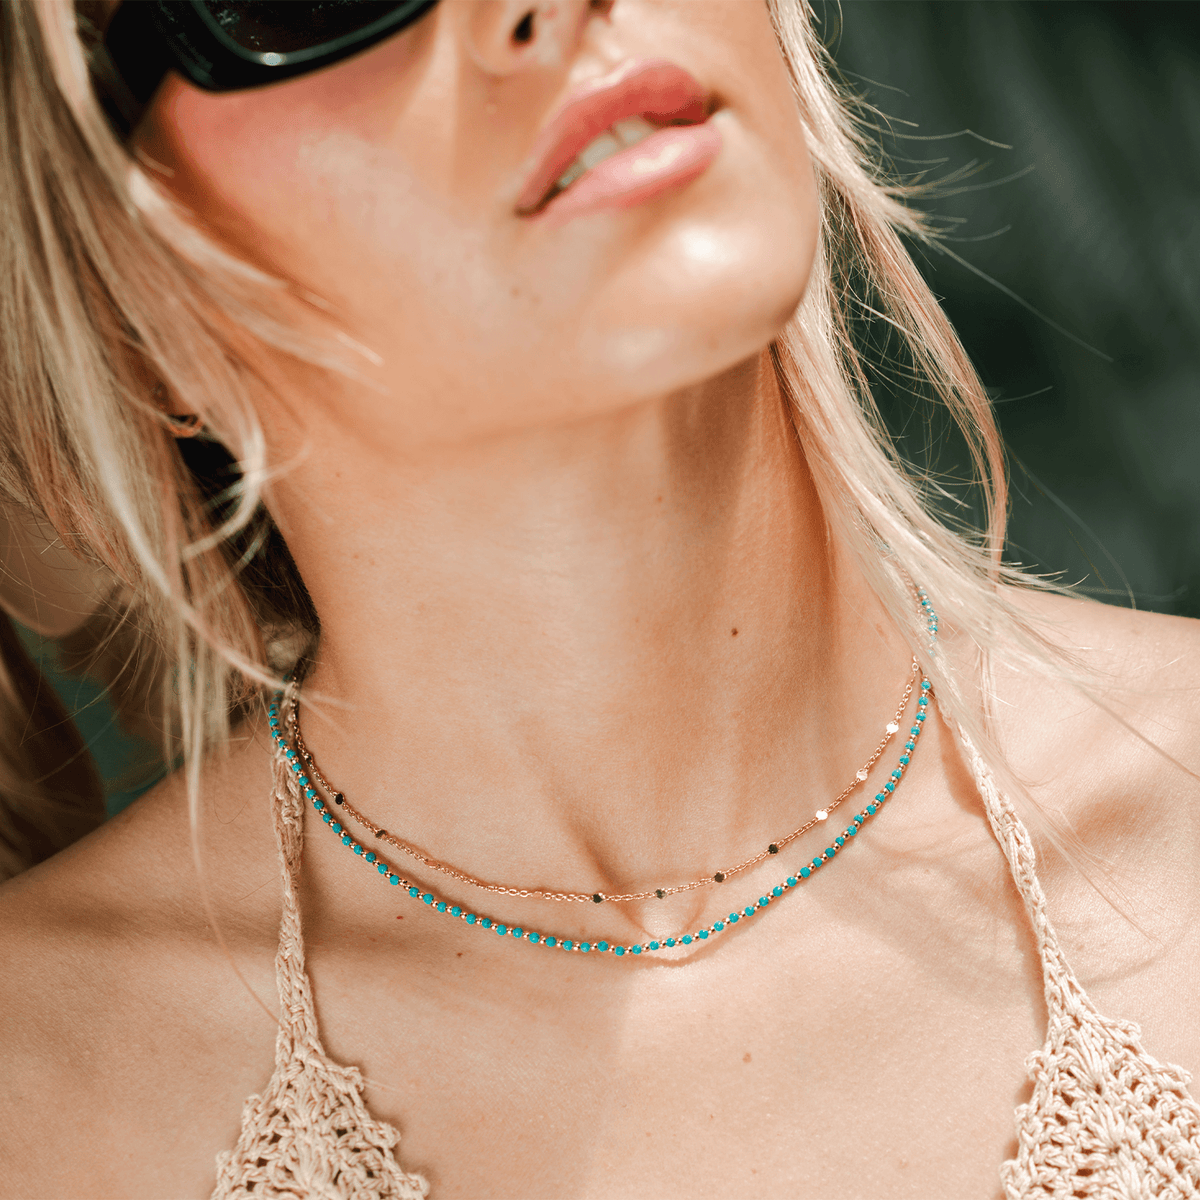 Model wearing necklace stack with a turquoise bead necklace and a simple gold chain necklace